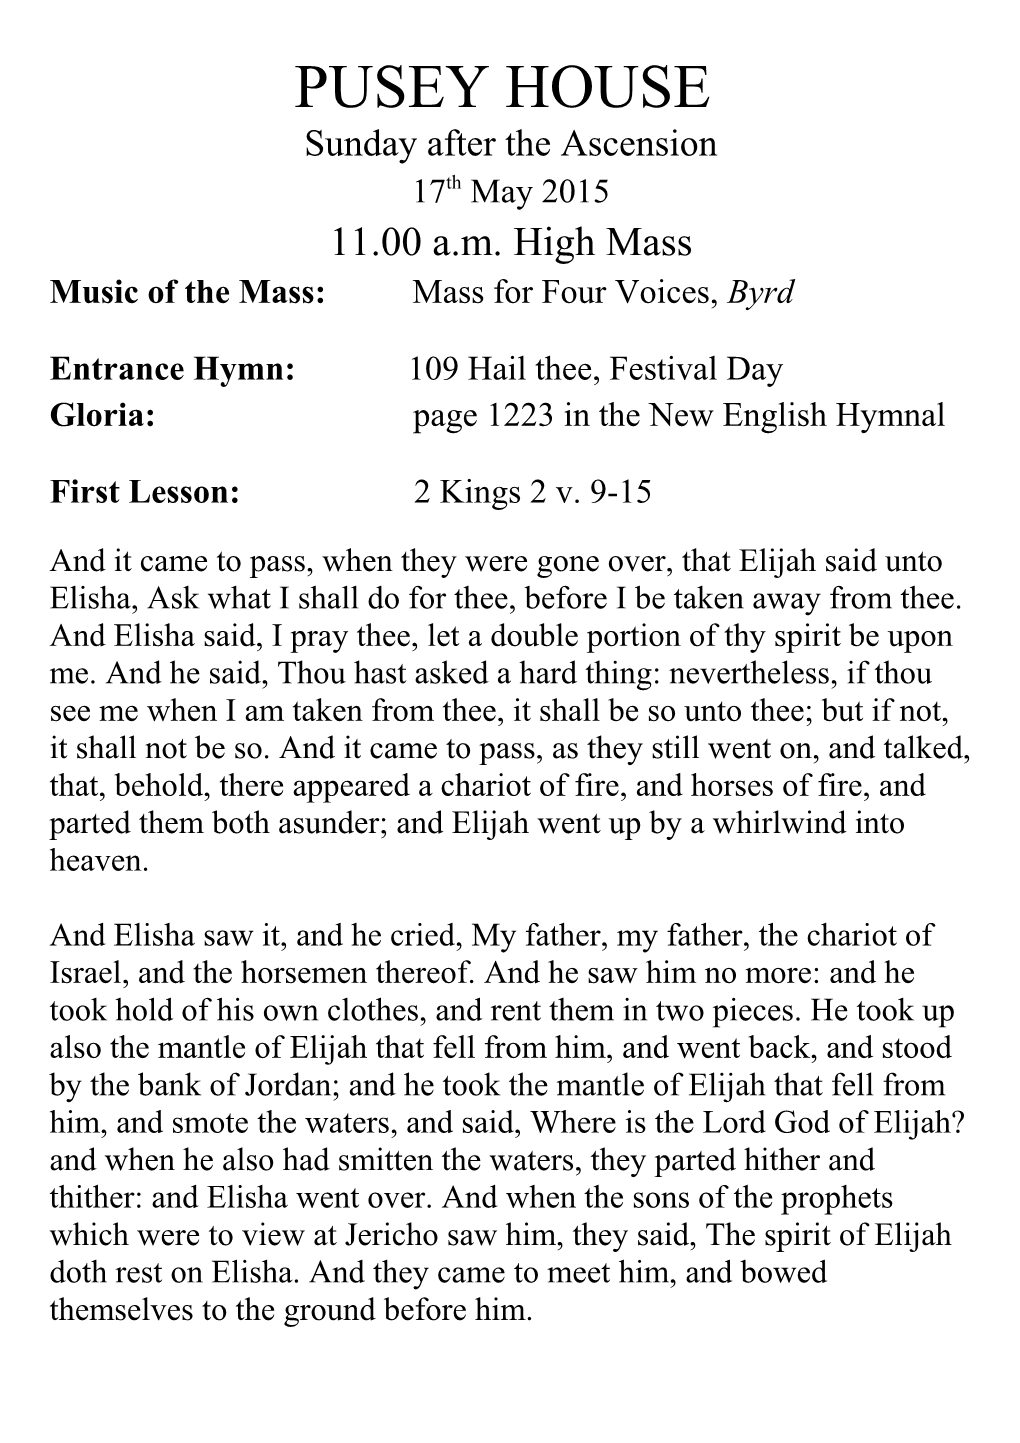 Music of the Mass: Mass for Four Voices,Byrd